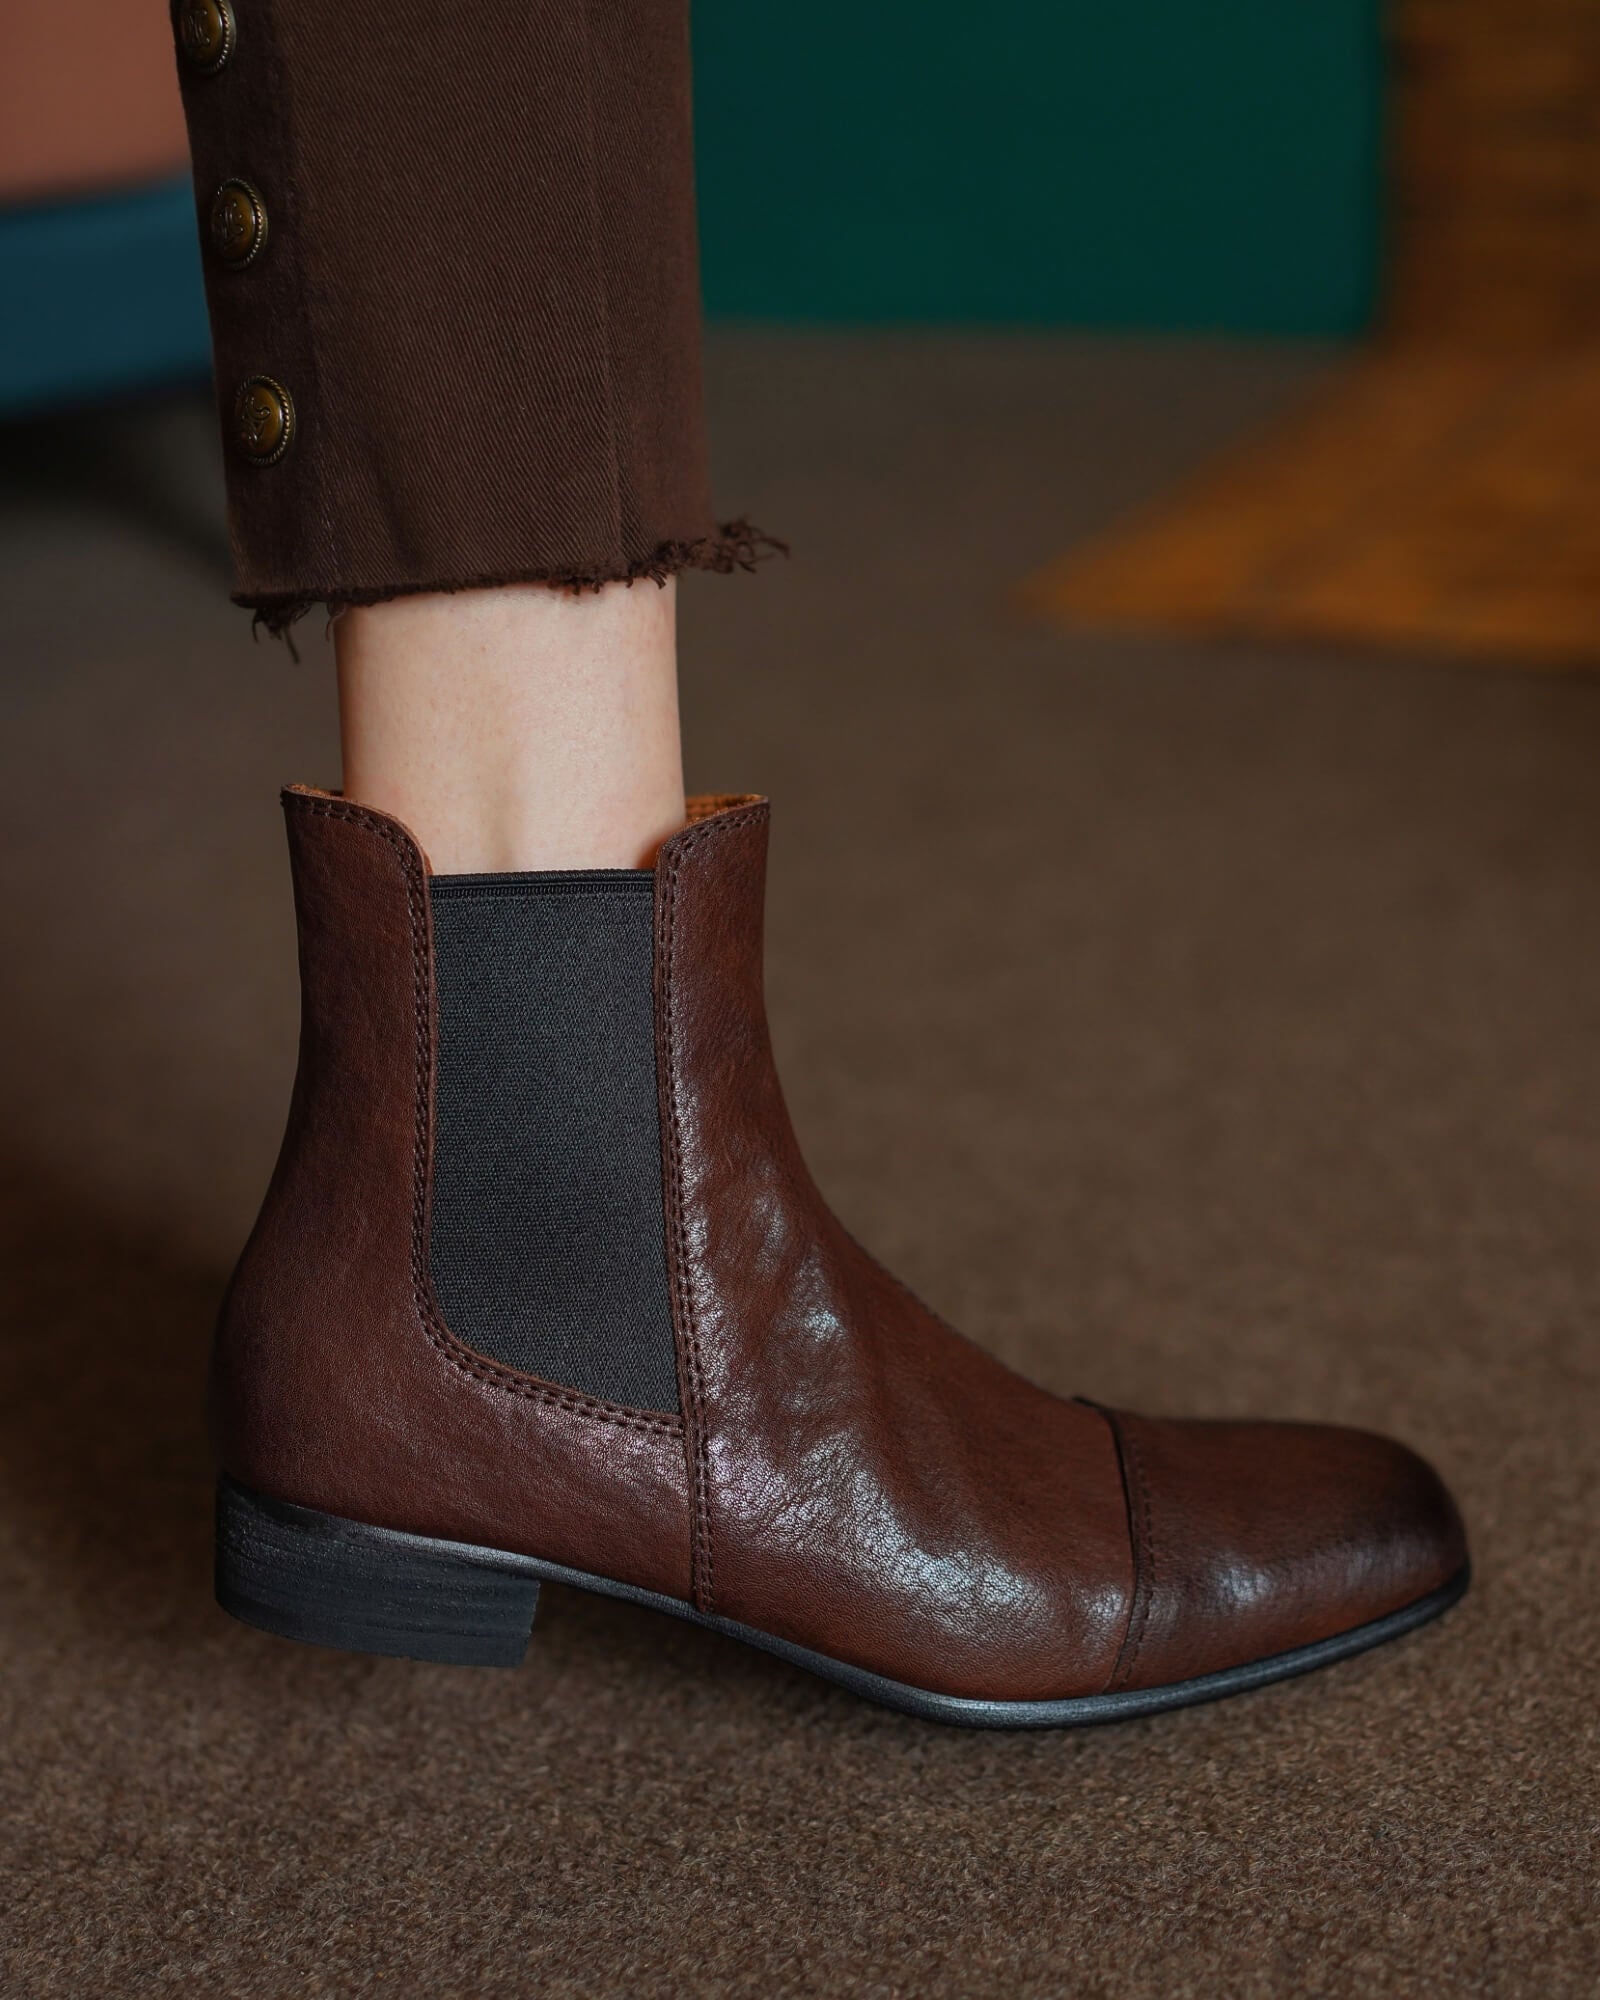 370-cap-toe-brown-leather-boots-model-2